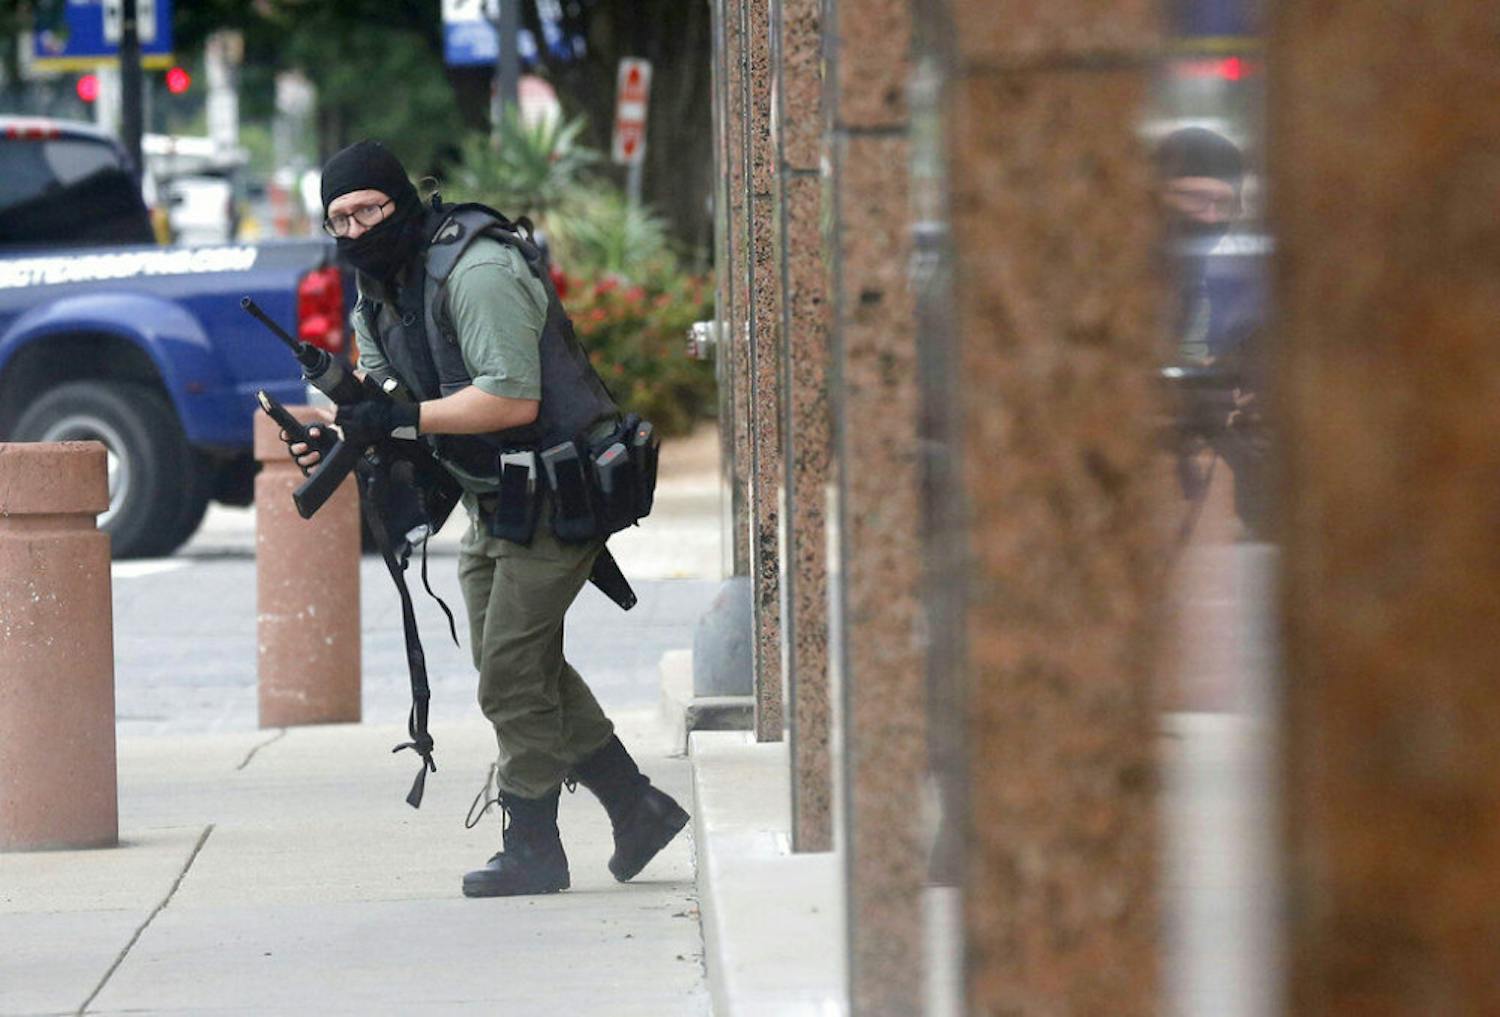 An armed shooter stands near the Earle Cabell Federal Building Monday, June 17, 2019, in downtown Dallas. The shooter was hit and injured in an exchange of gunfire with federal officers outside the courthouse.&nbsp;